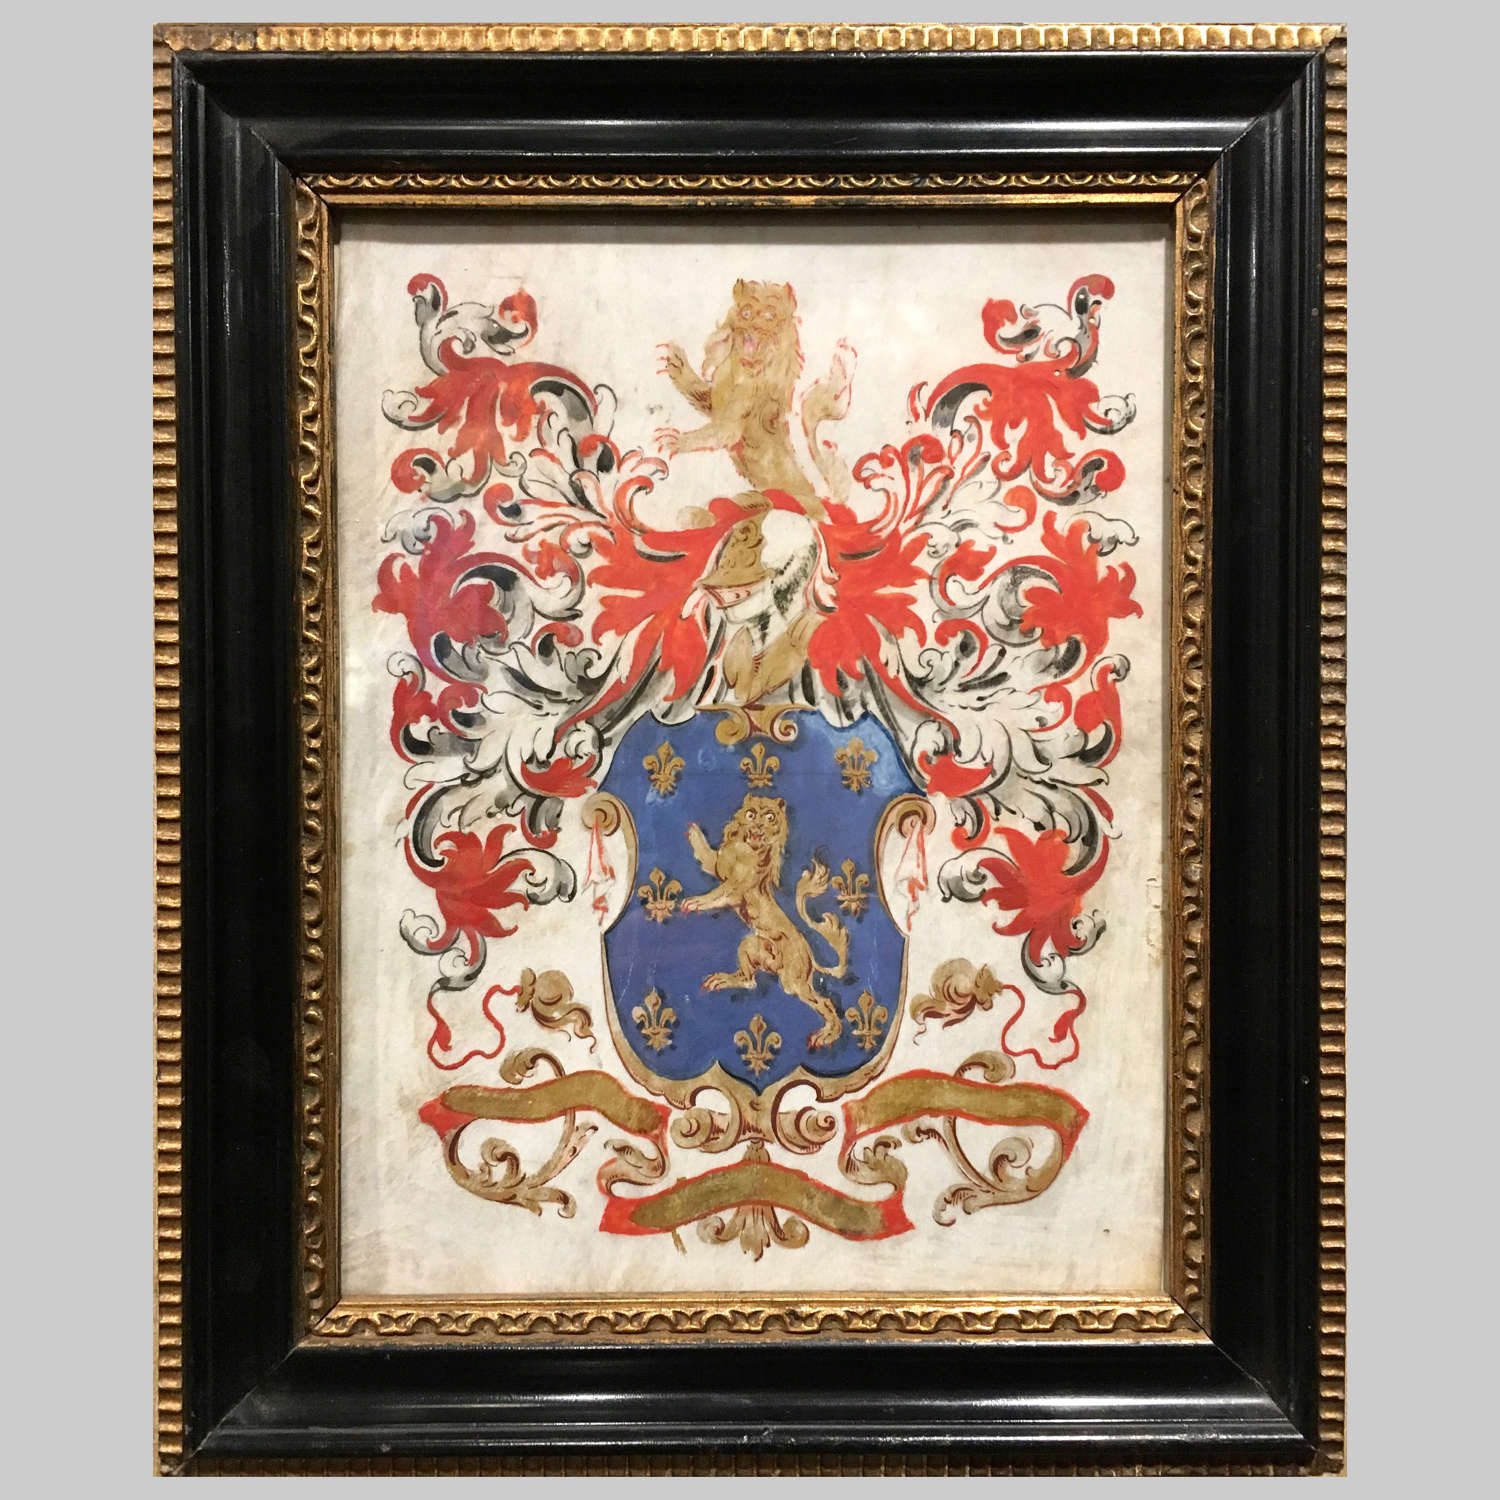 18th century Armorial noble coat of arms